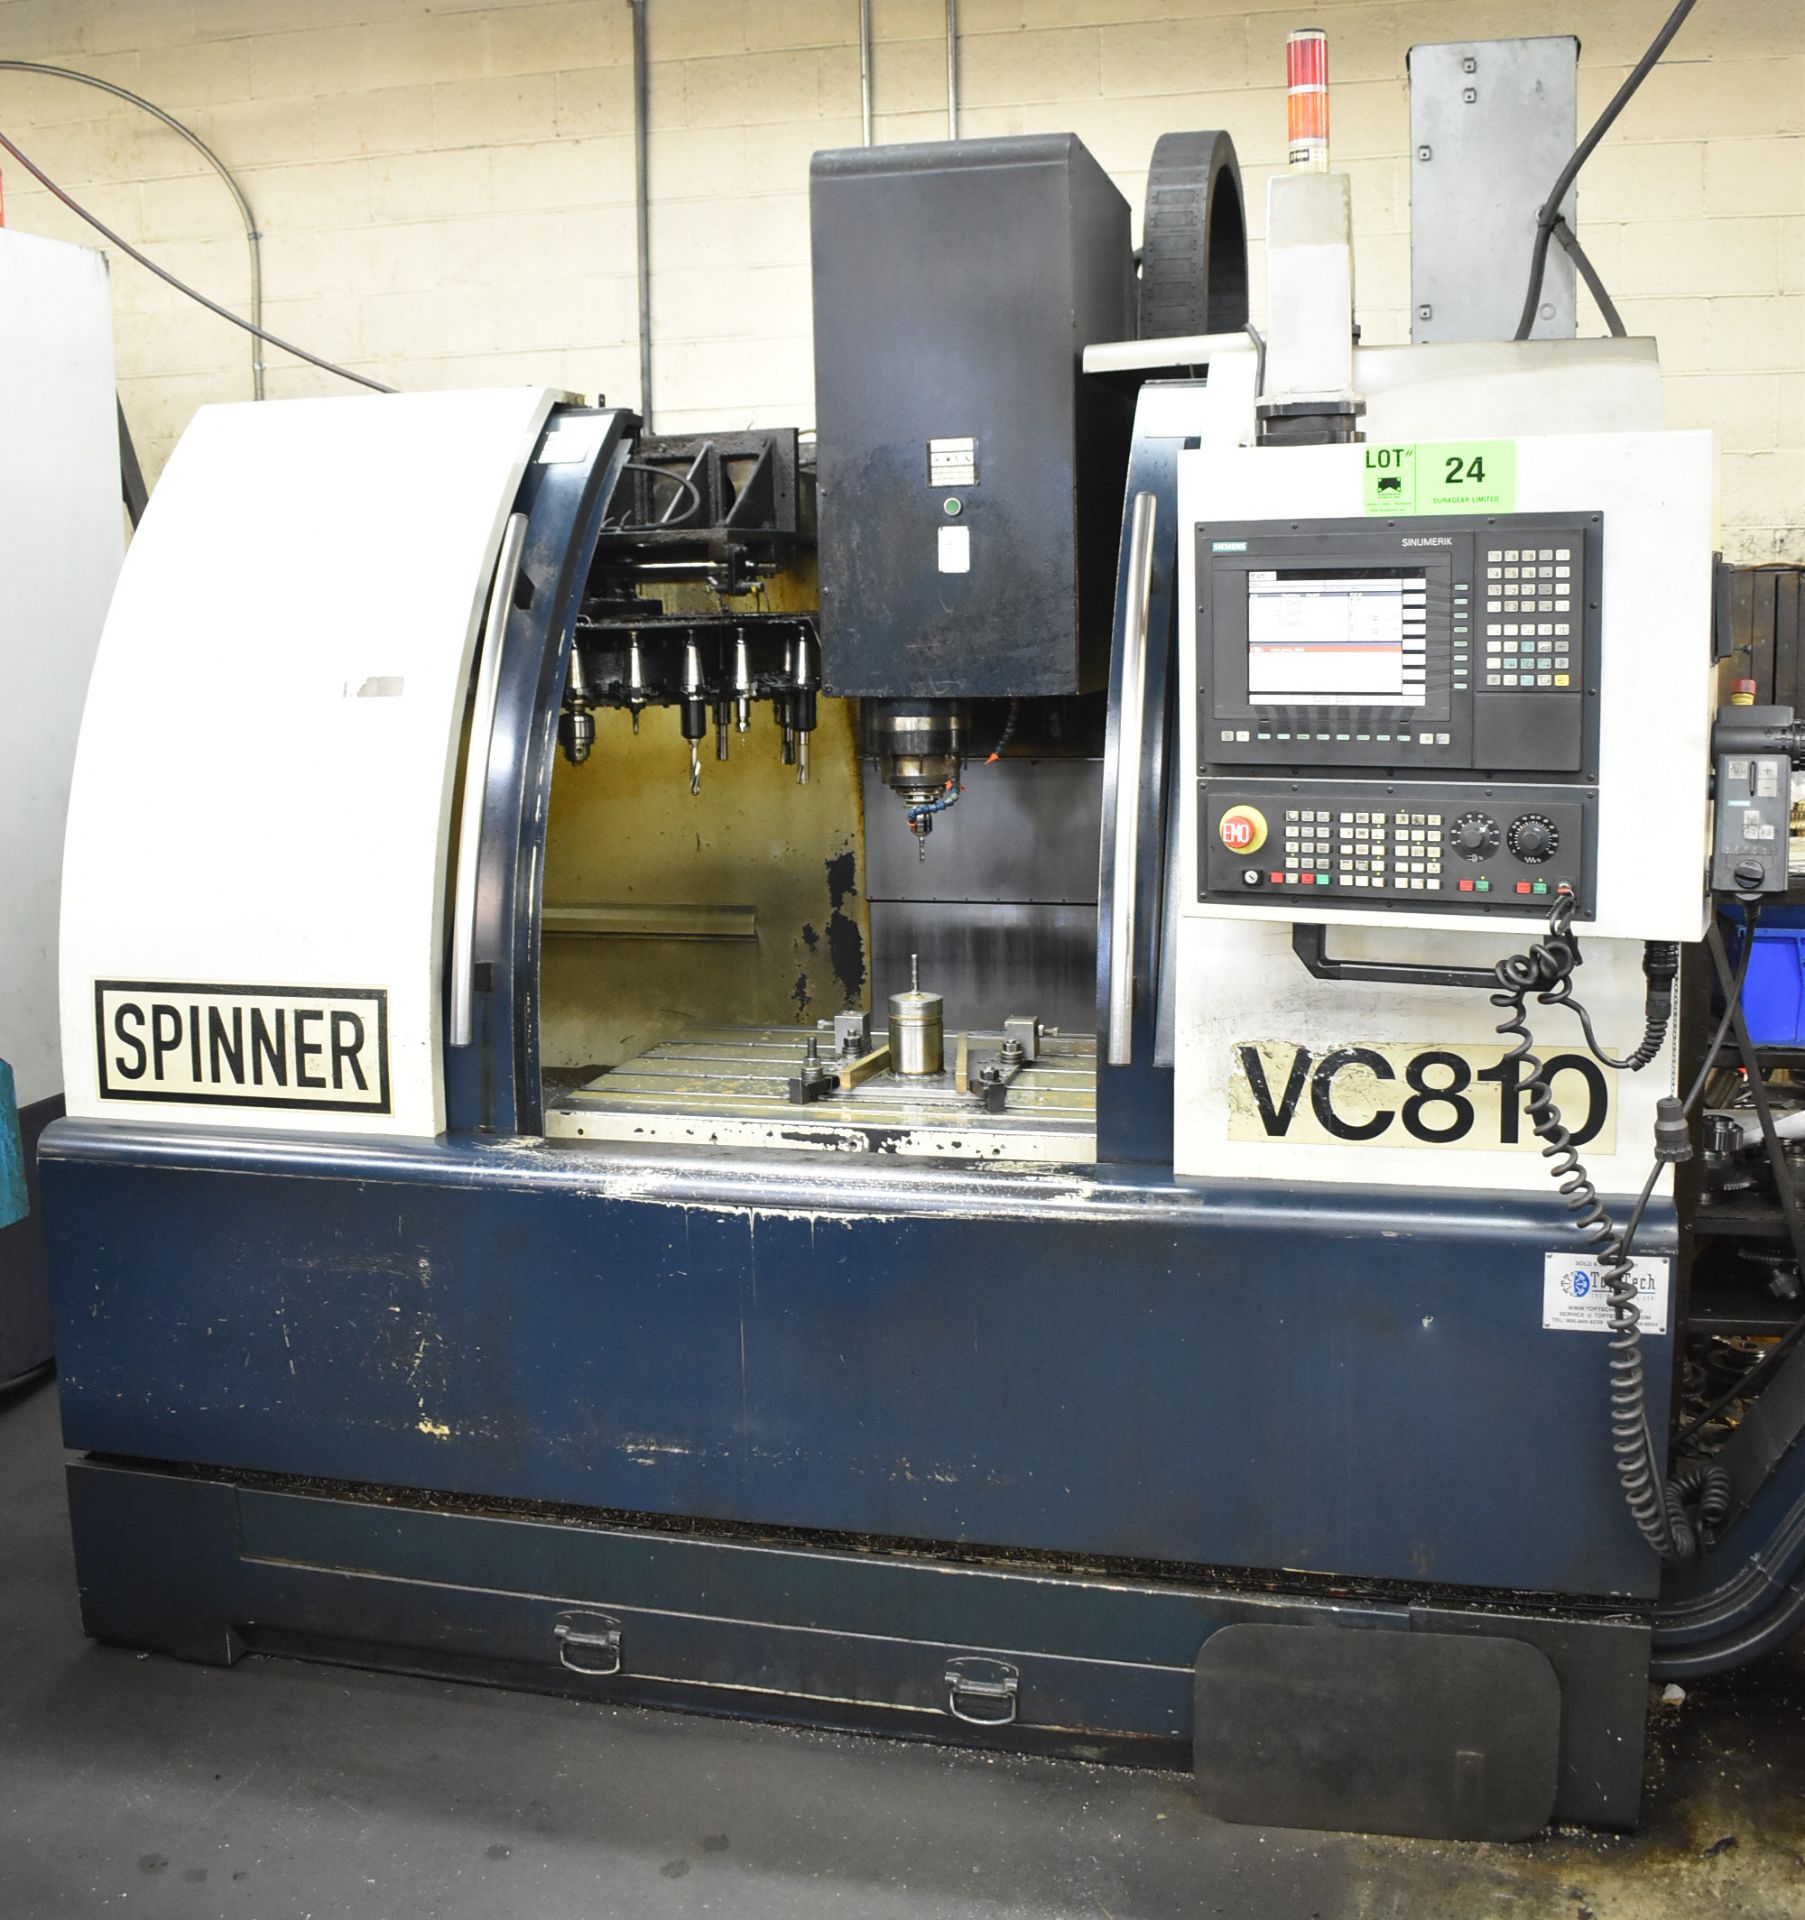 SPINNER VC-810 CNC VERTICAL MACHINING CENTER WITH SIEMENS SINUMERIK CNC CONTROL, 24" X 39" T-SLOT - Image 2 of 7